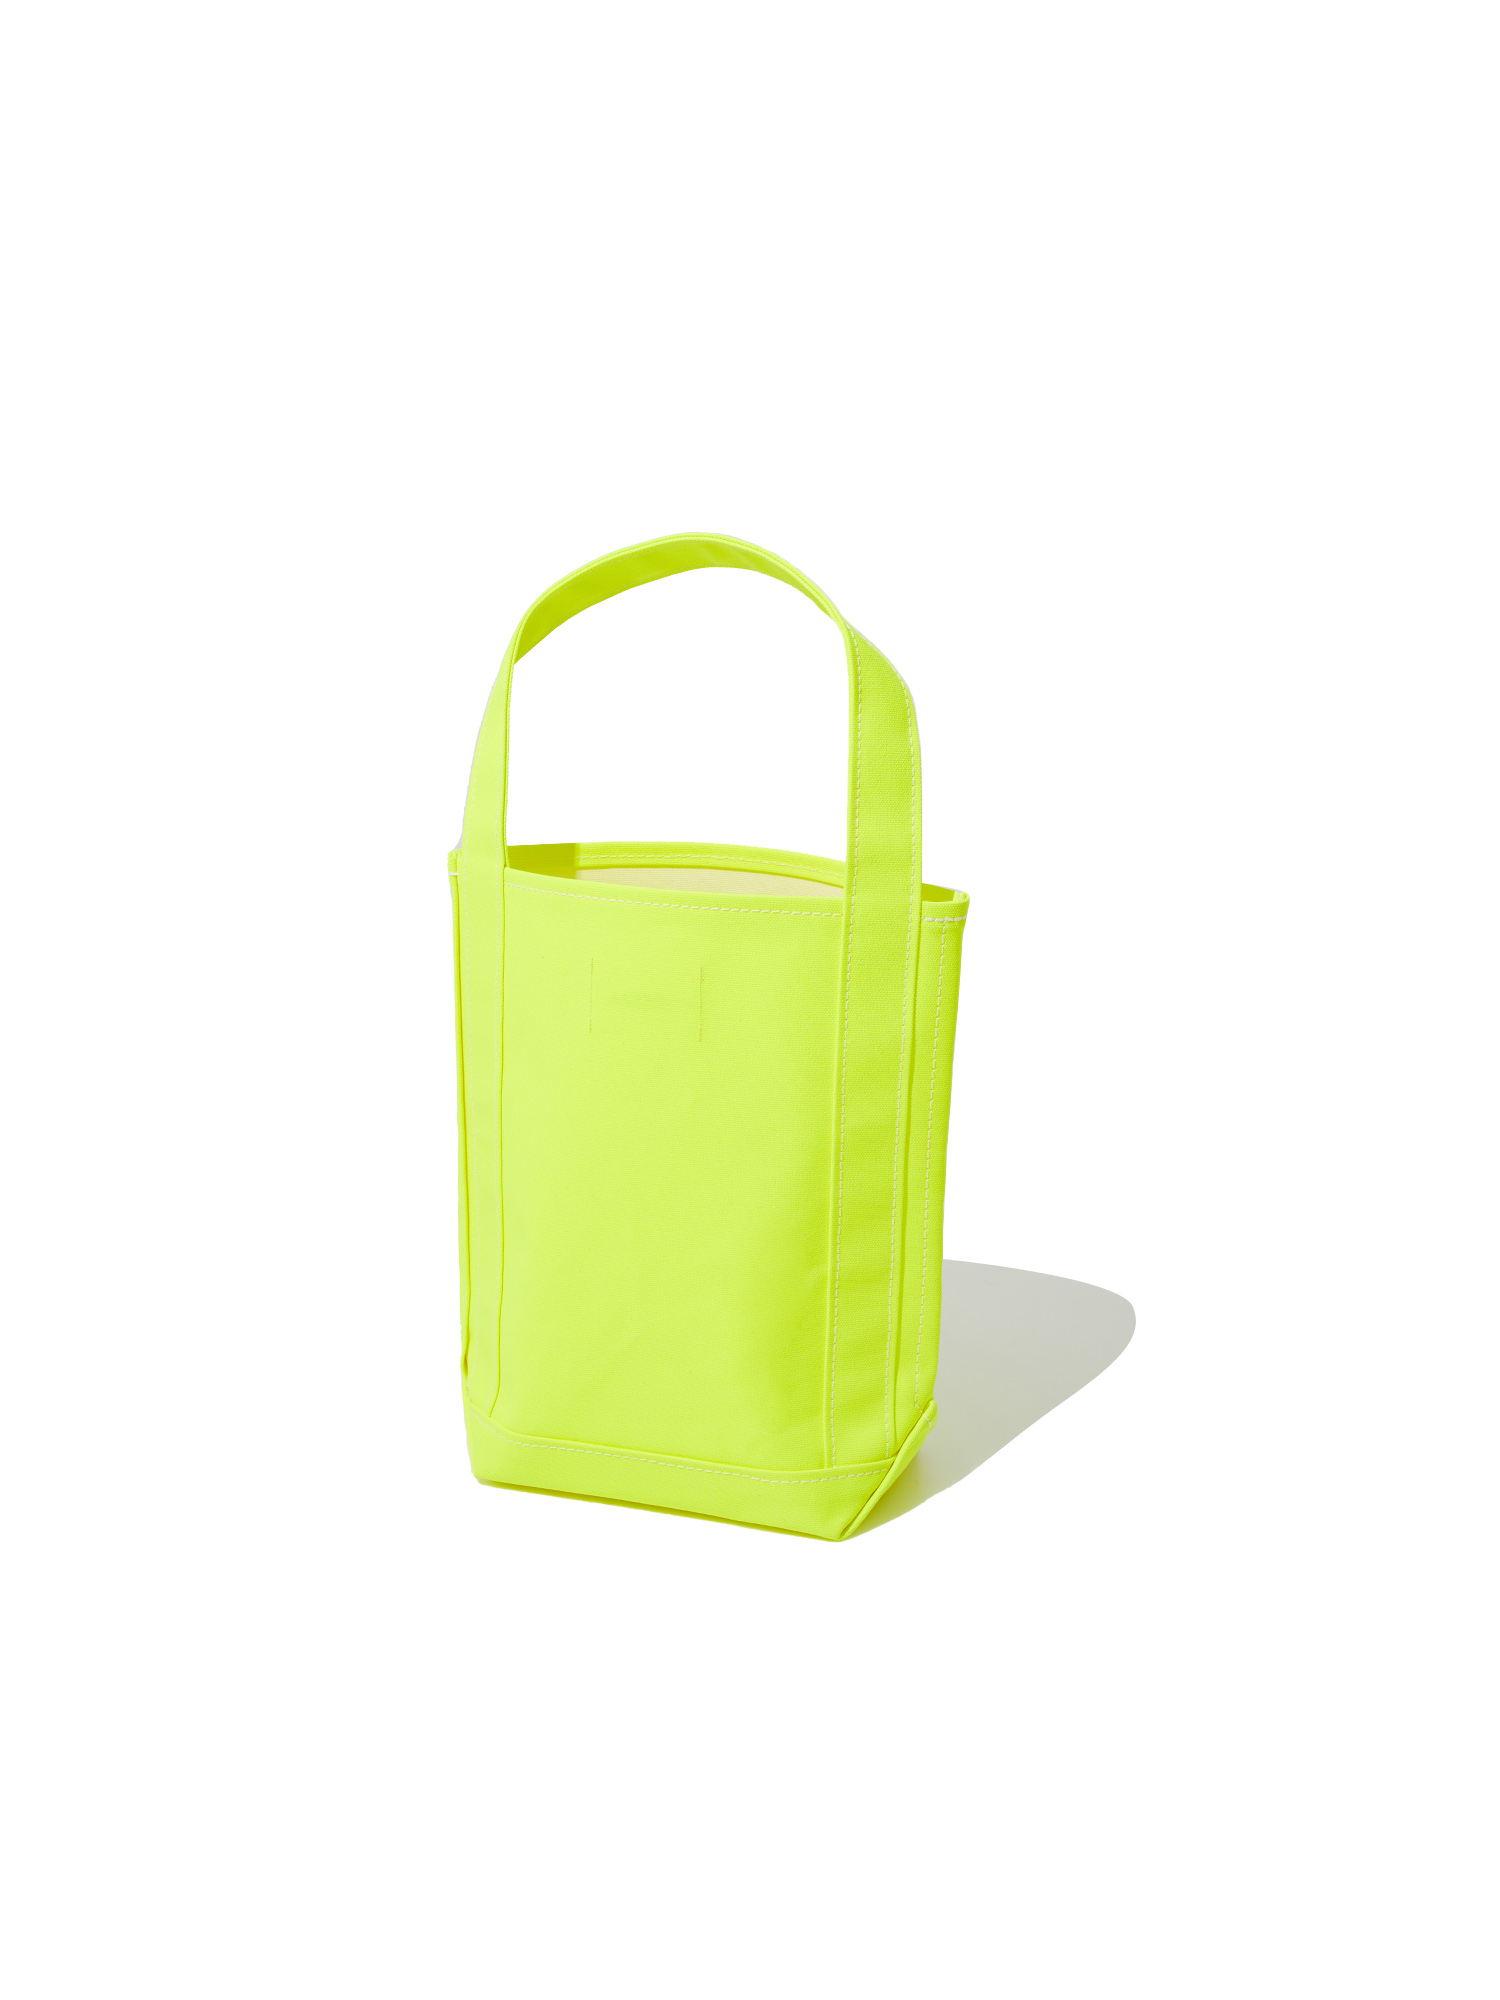 BAGUETTE TOTE SMALL NEON (YELLOW)